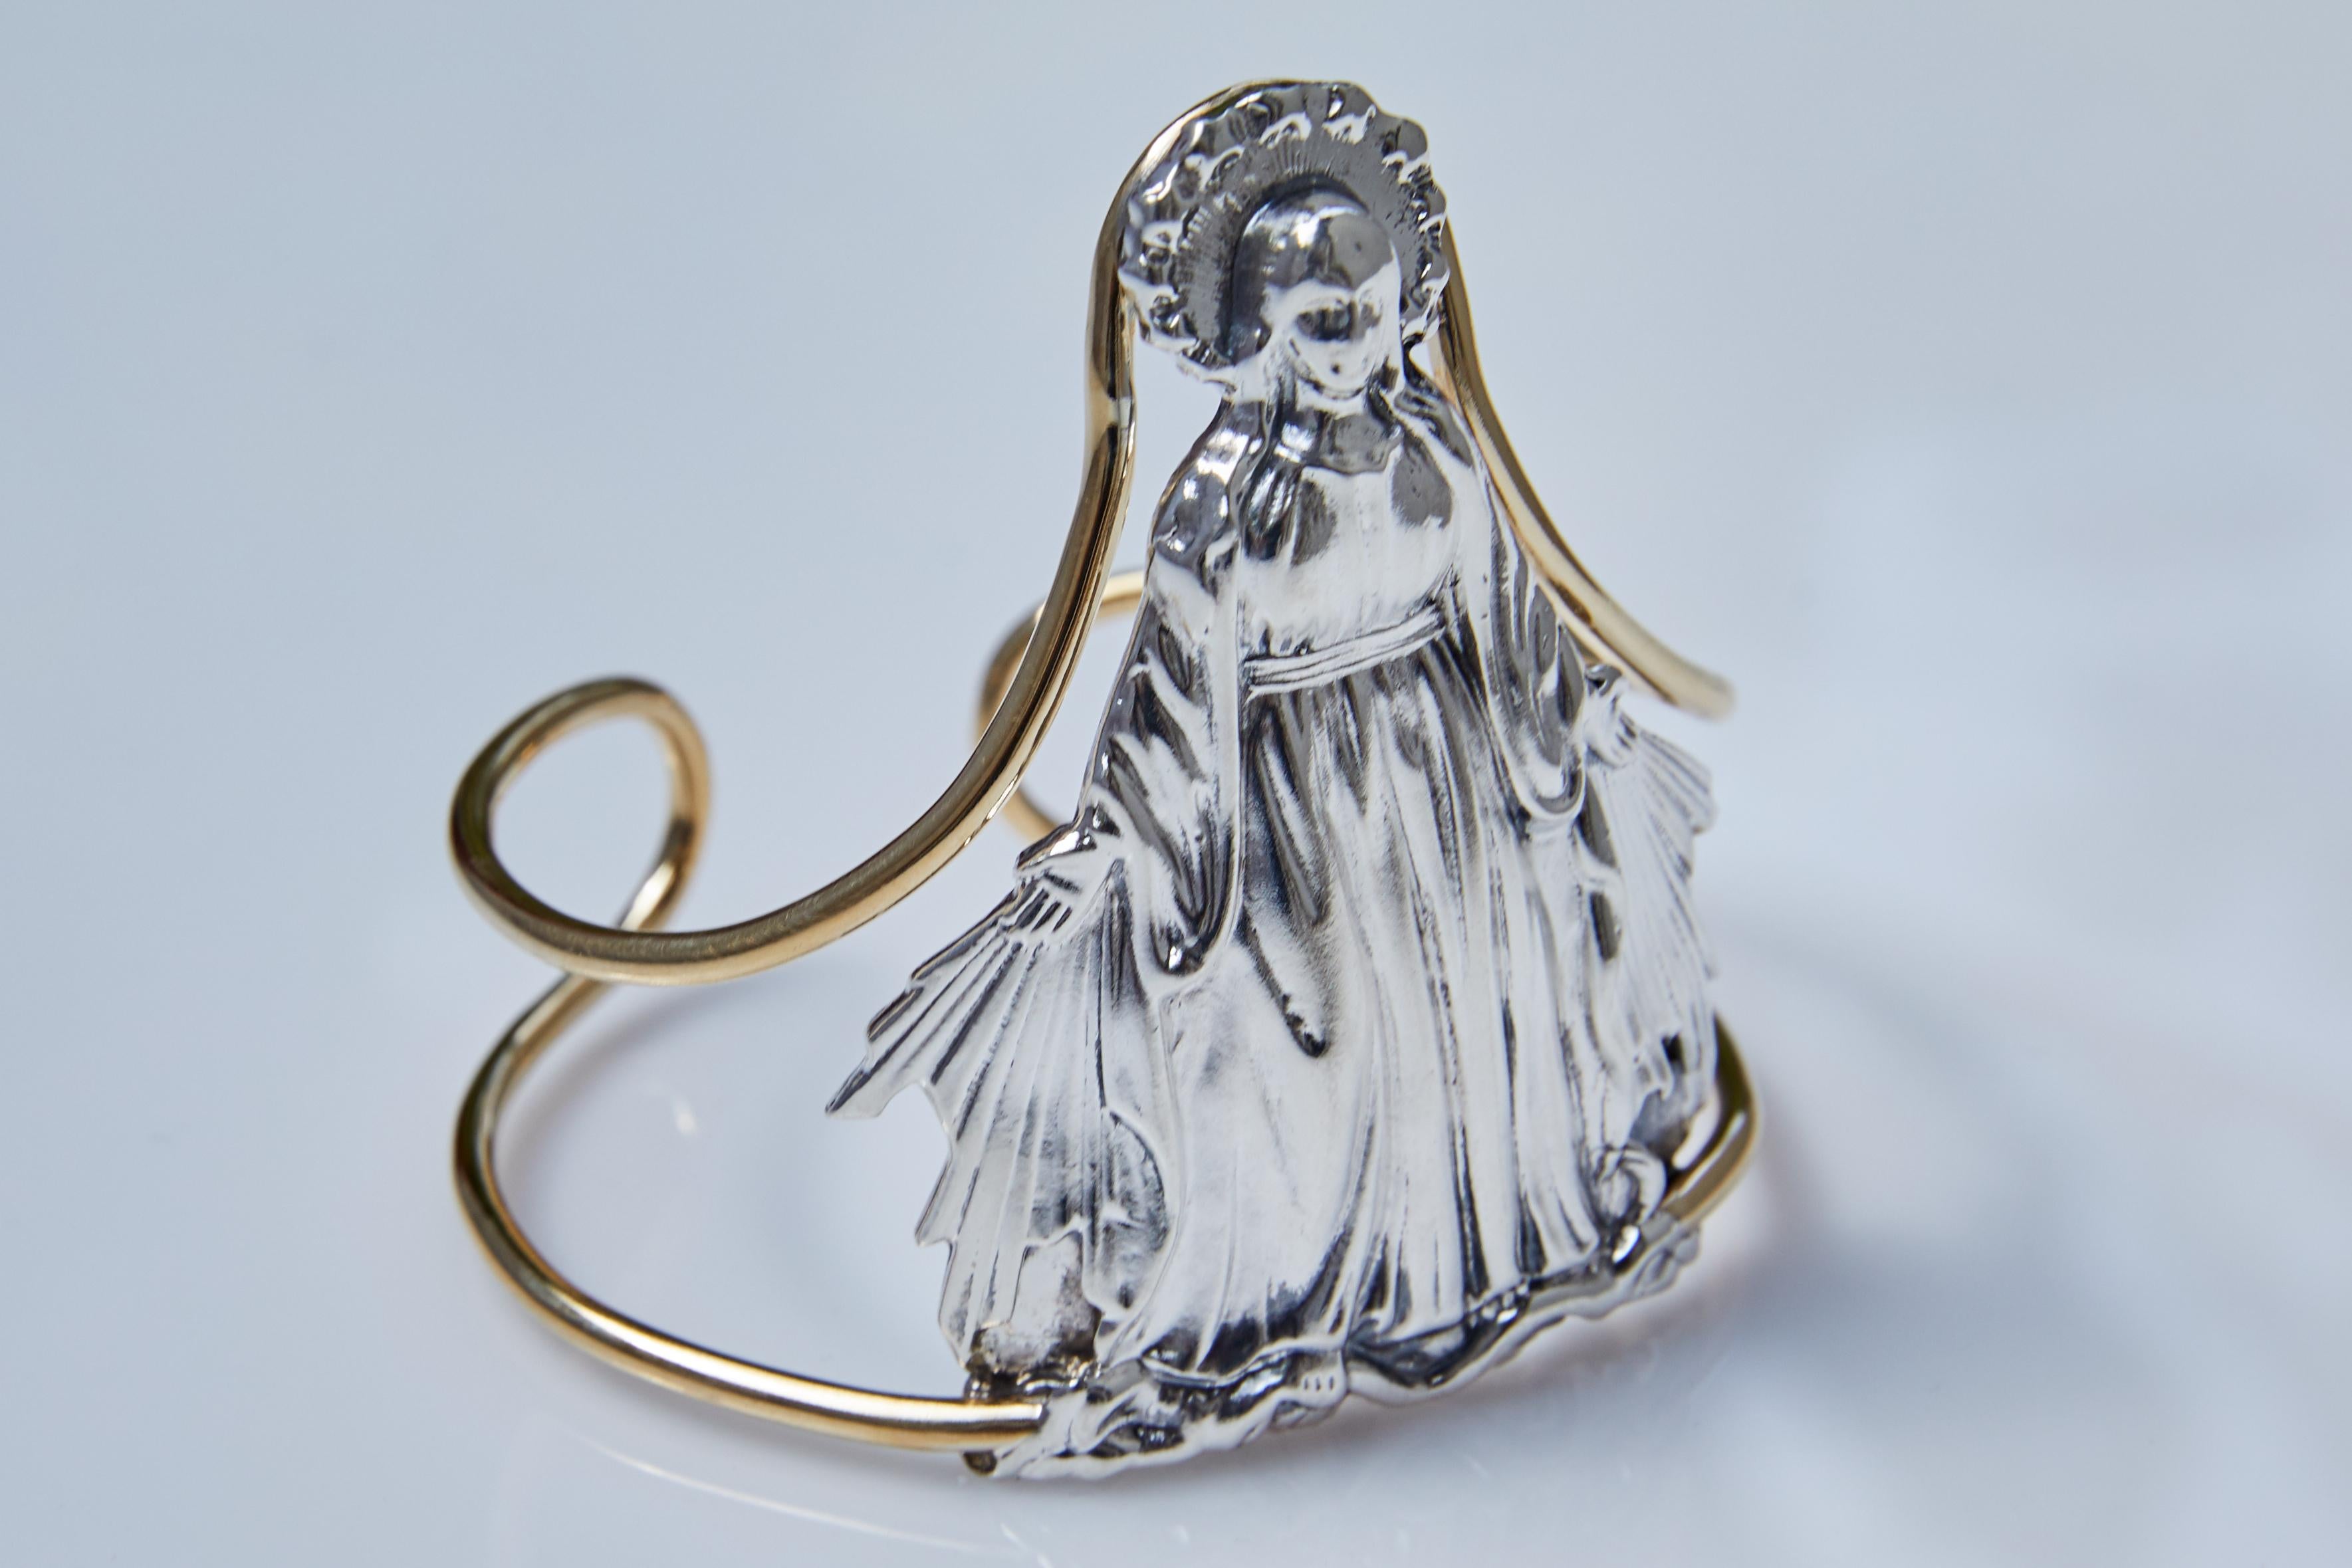 Virgin Mary Mother Mary Cuff Bangle Bracelet Statement Silver Brass J Dauphin In New Condition For Sale In Los Angeles, CA